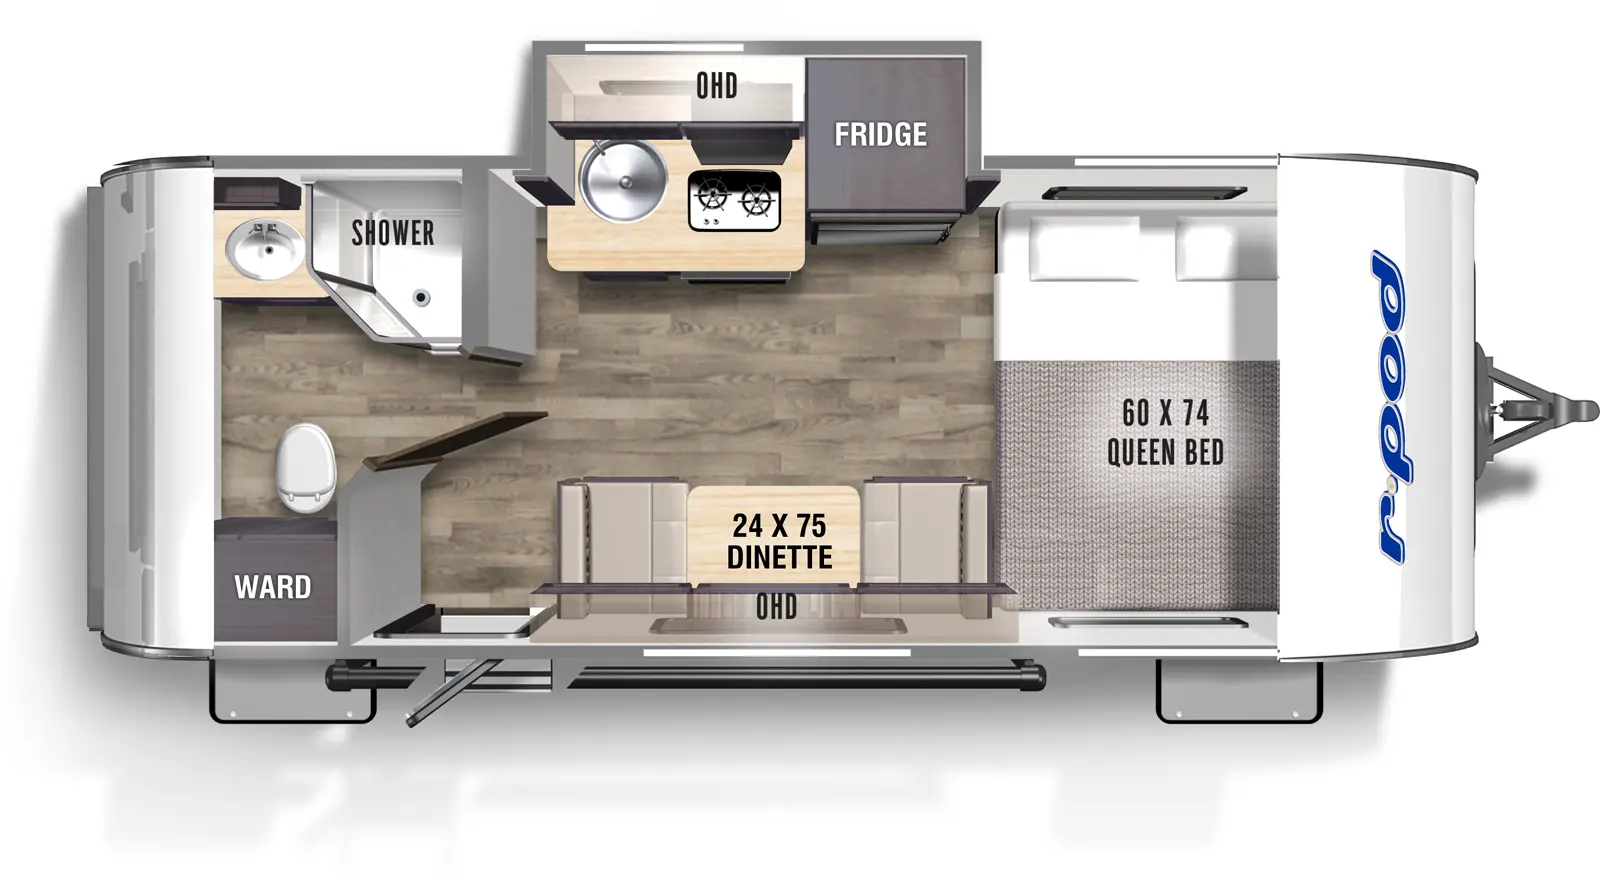 The RP-180C has one slide out and one entry. Interior layout front to back: side facing queen bed; off-door side slideout with refrigerator, kitchen counter with sink and cooktop, and overhead cabinet; door side dinette with overhead cabinet, and entry; rear full bathroom with wardrobe.